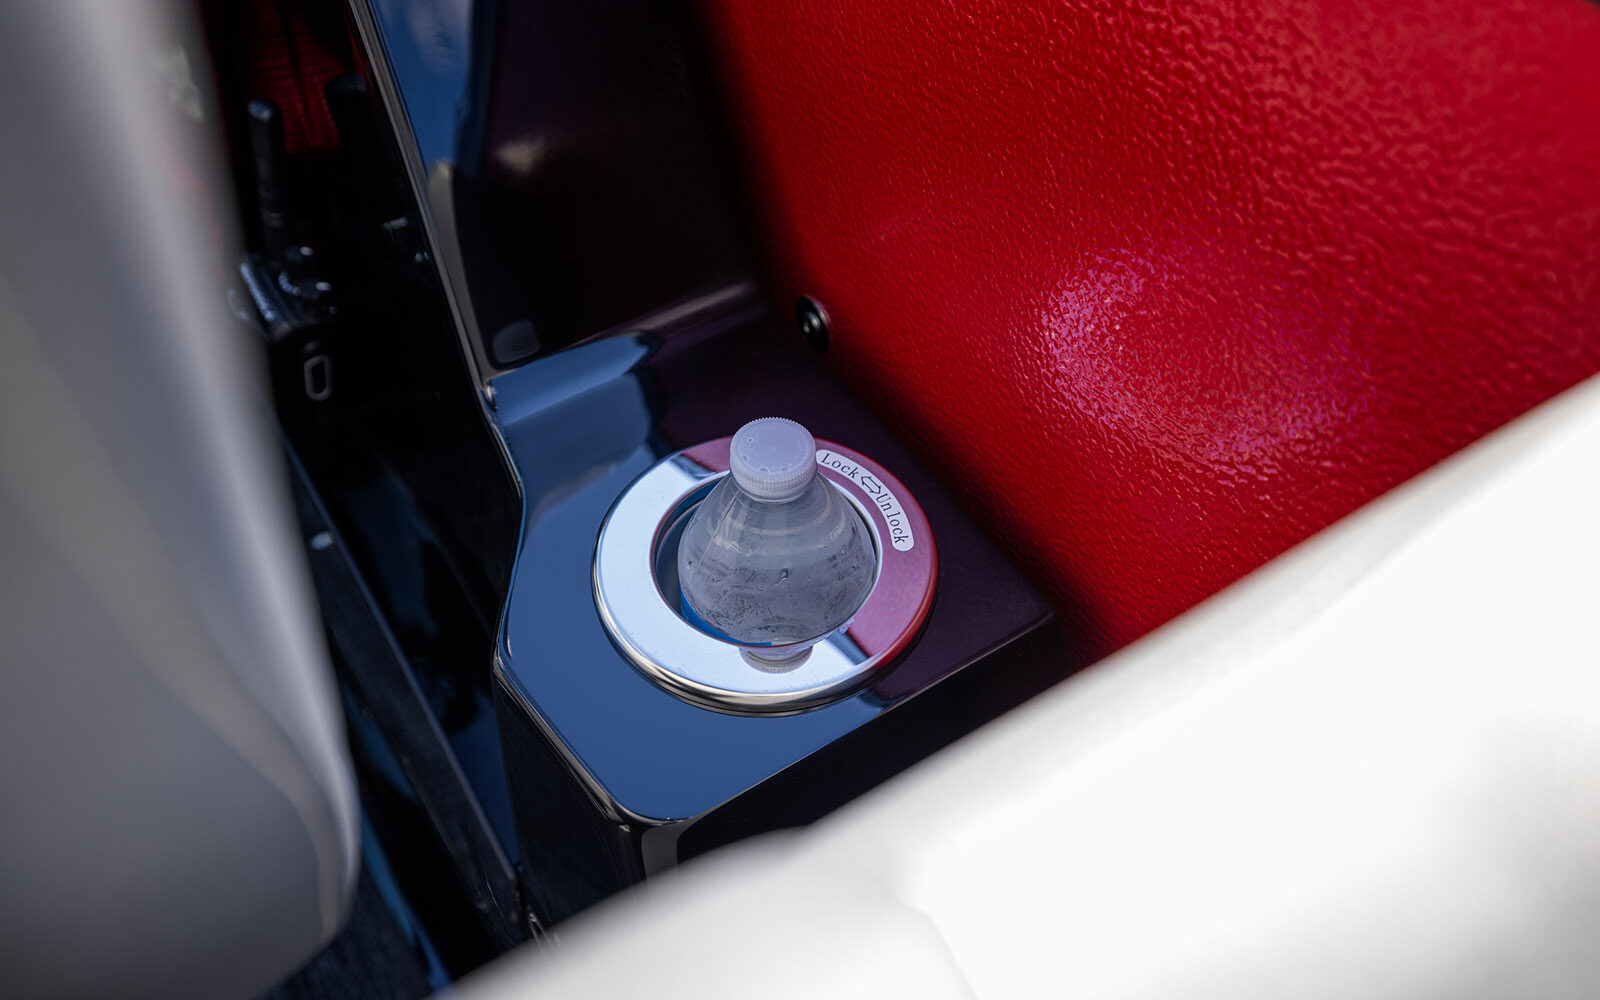 Refrigerated cupholder